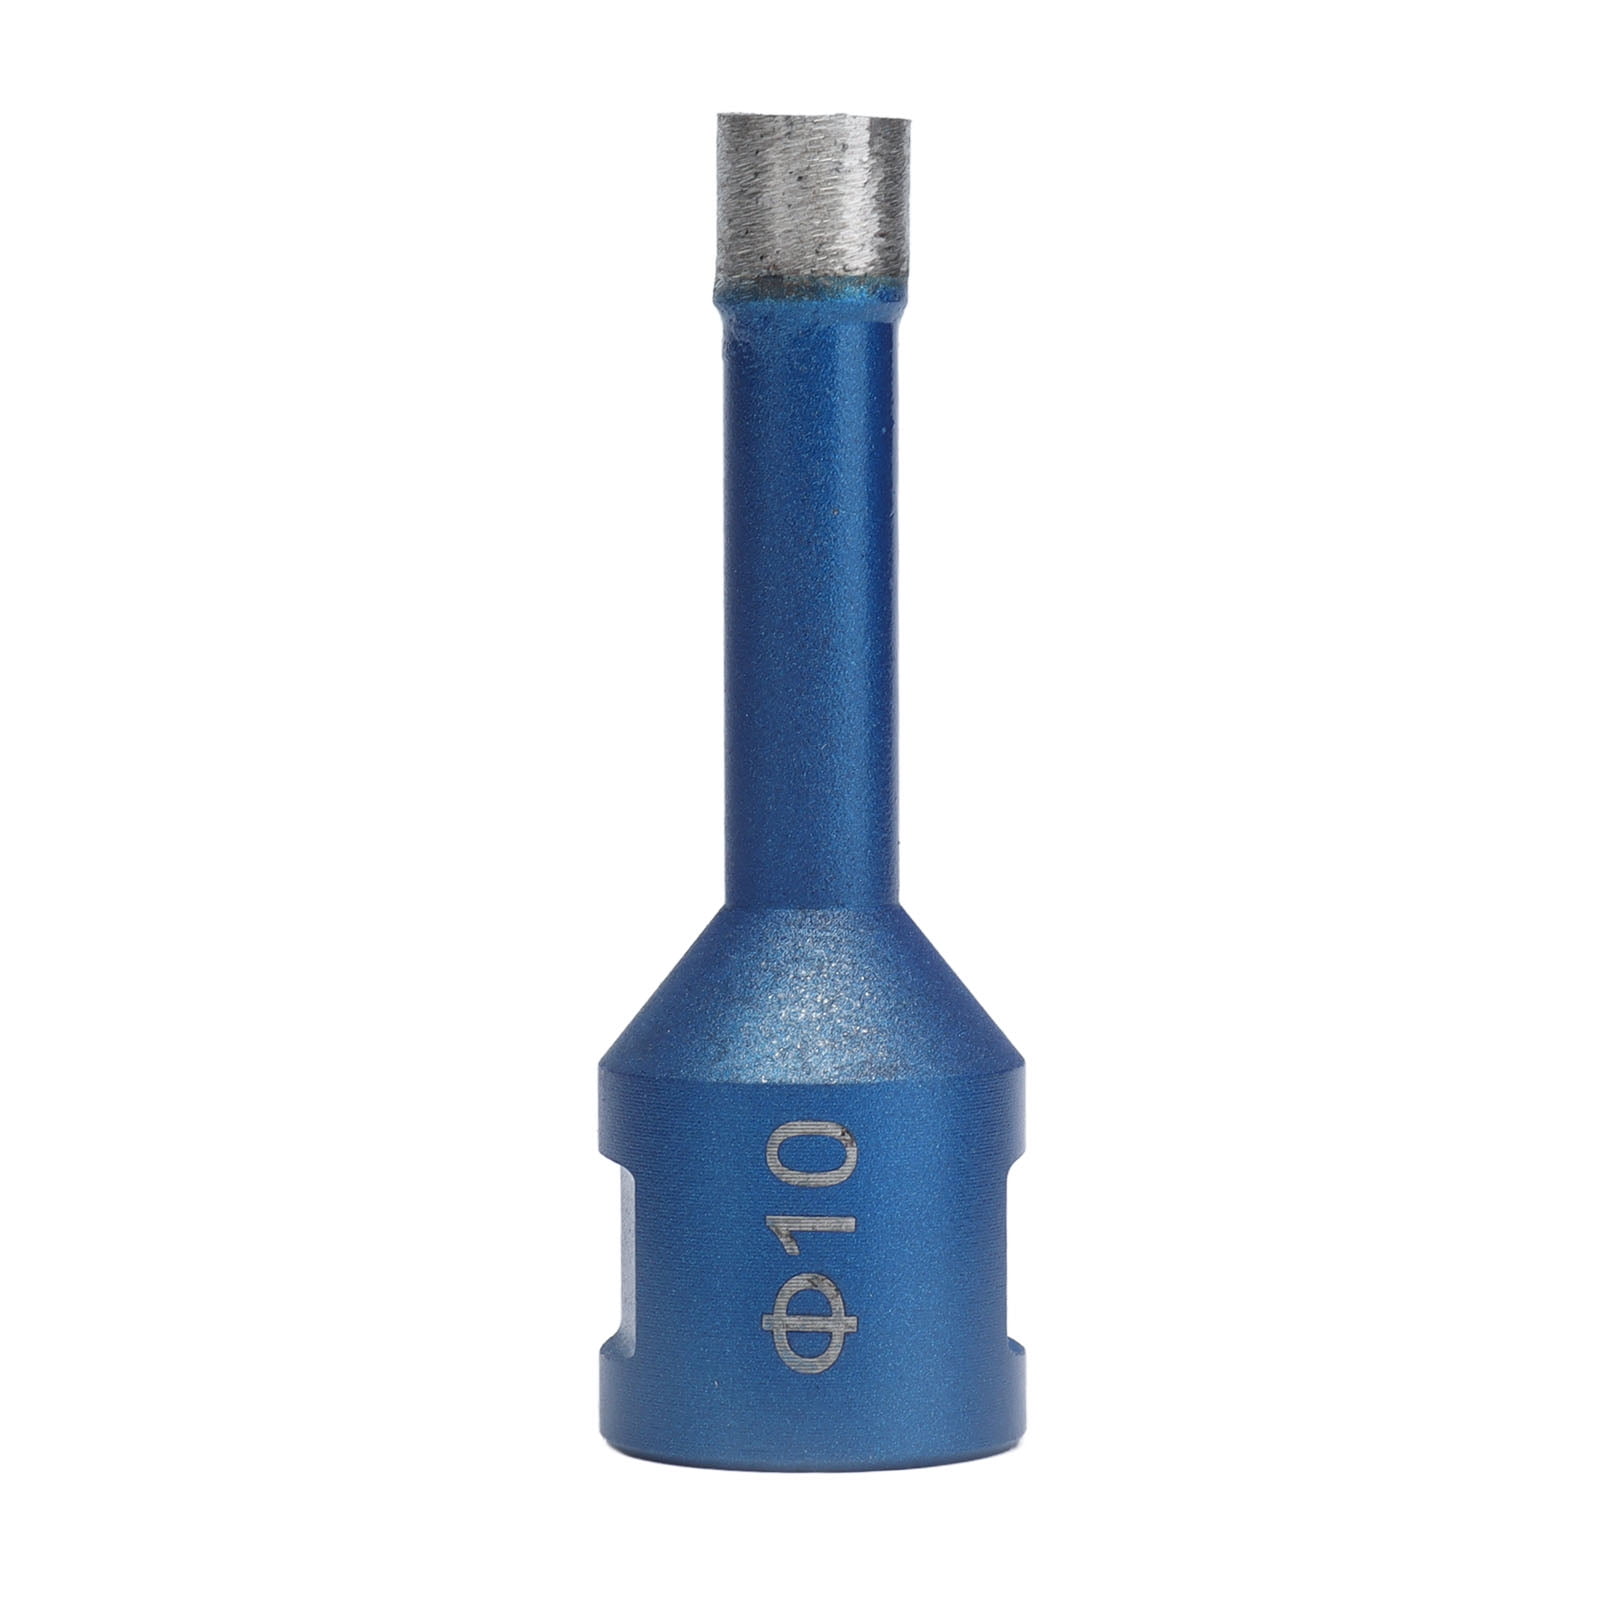 Hole Opener Sintered Diamond Hole Saw Drill Bit for Marble Granite ...